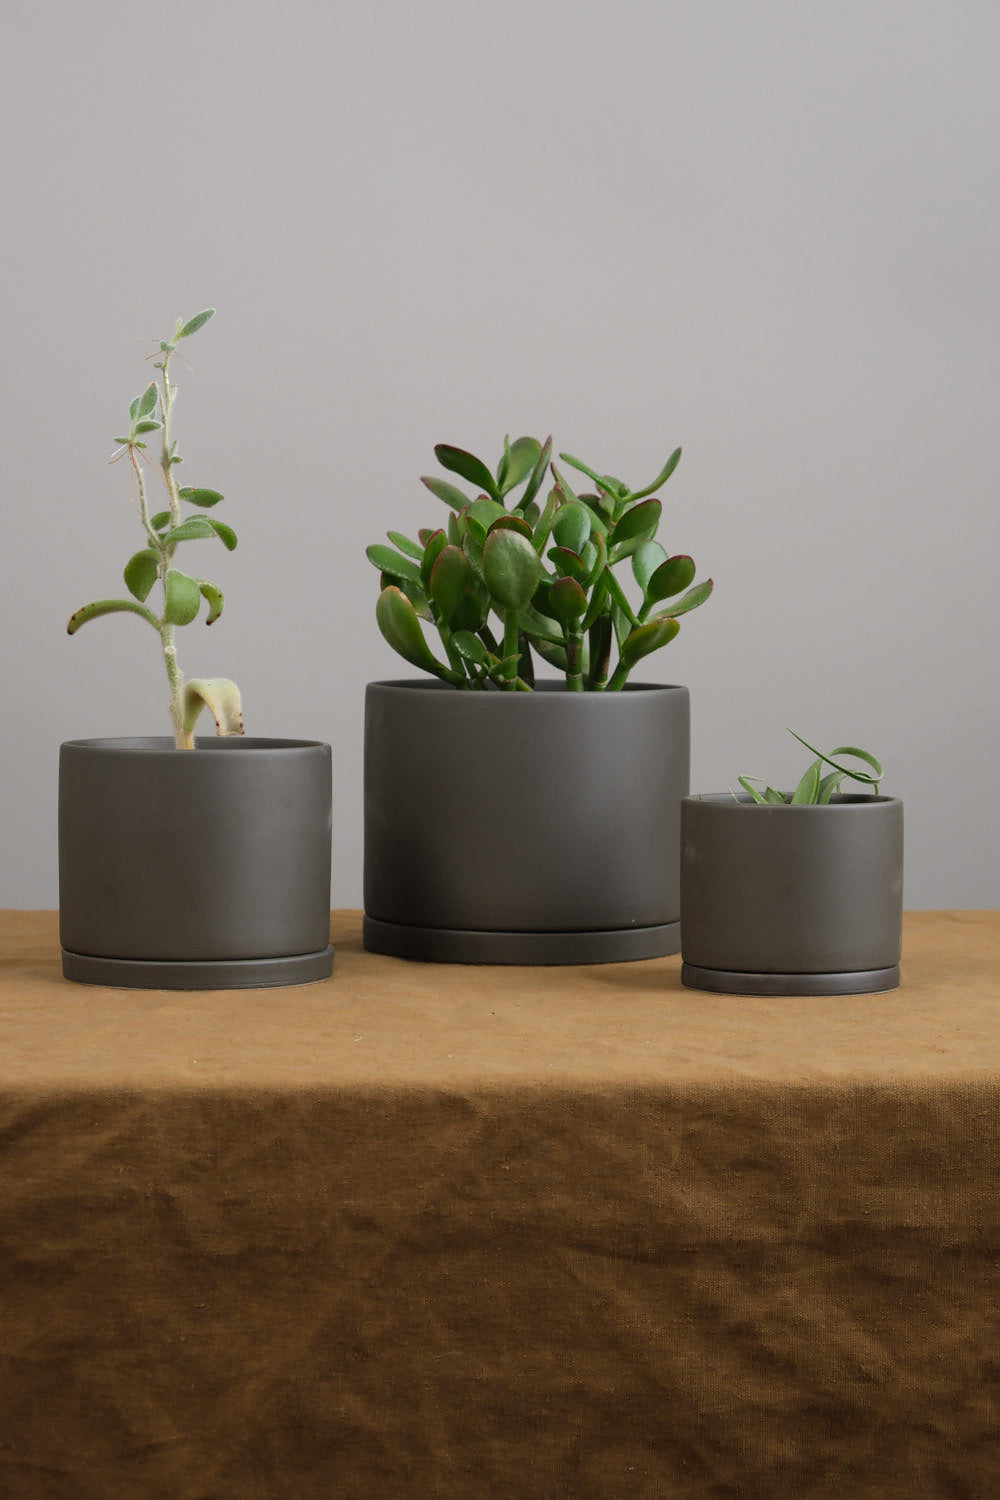 Varied sizes of plant pots